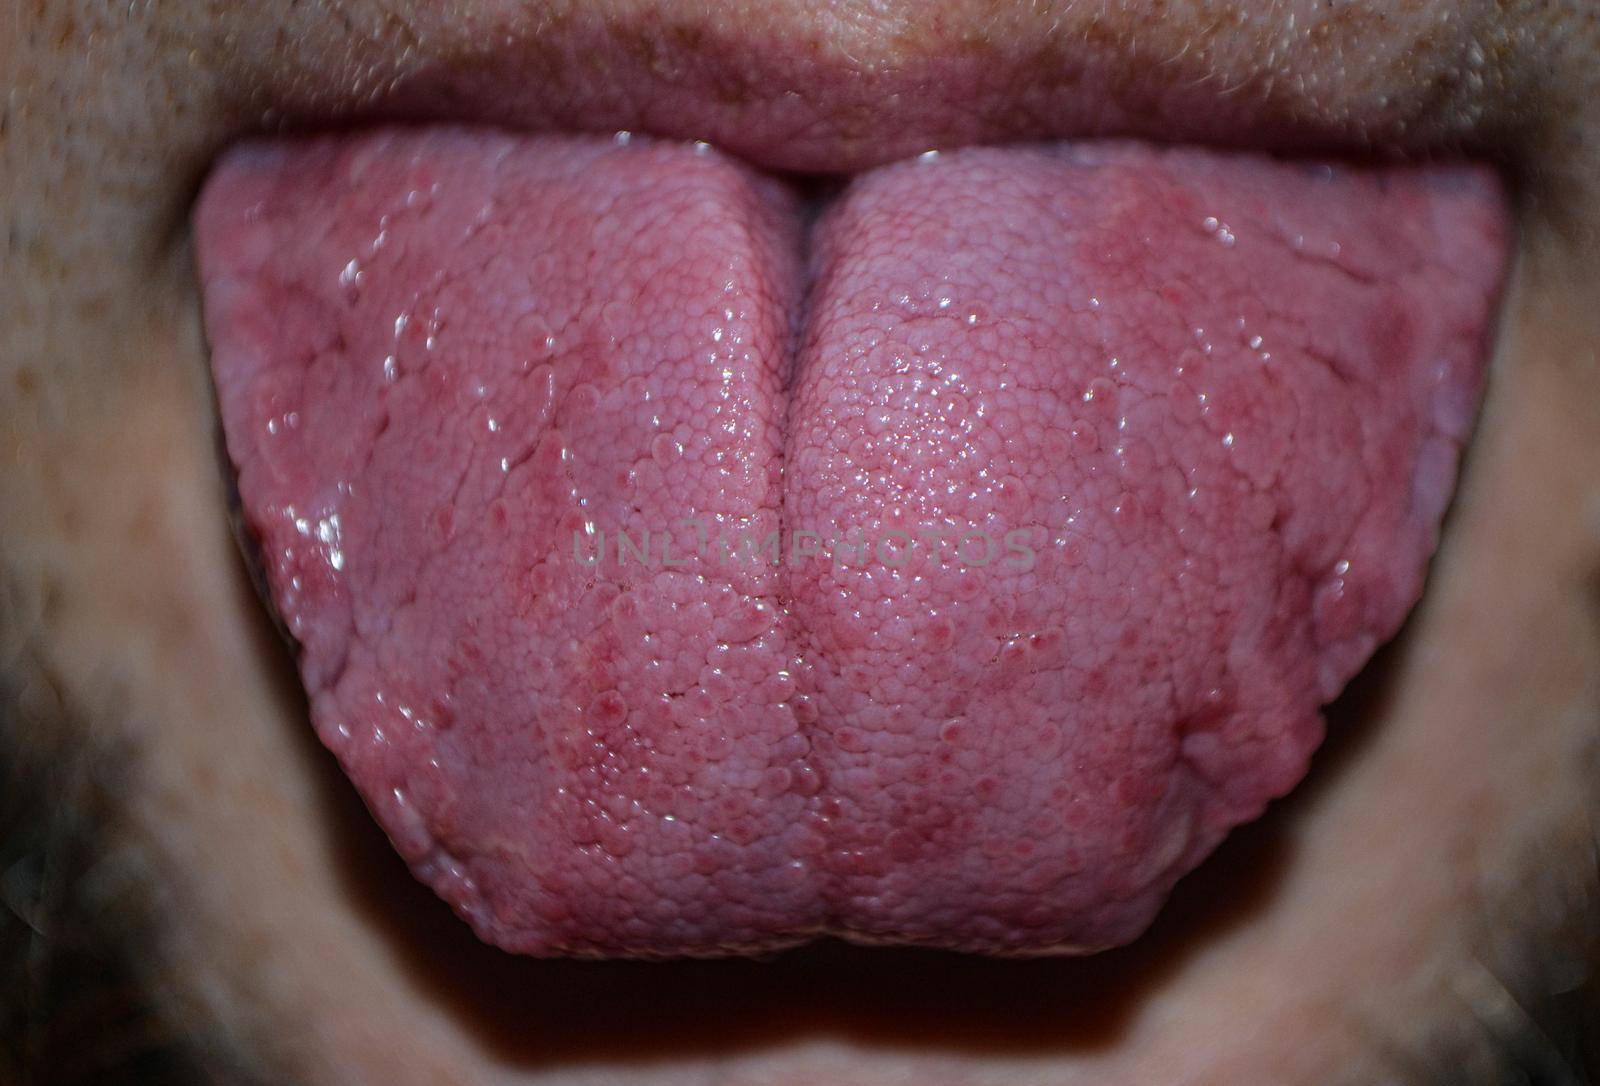 damaged tongue of an adult man. High quality photo